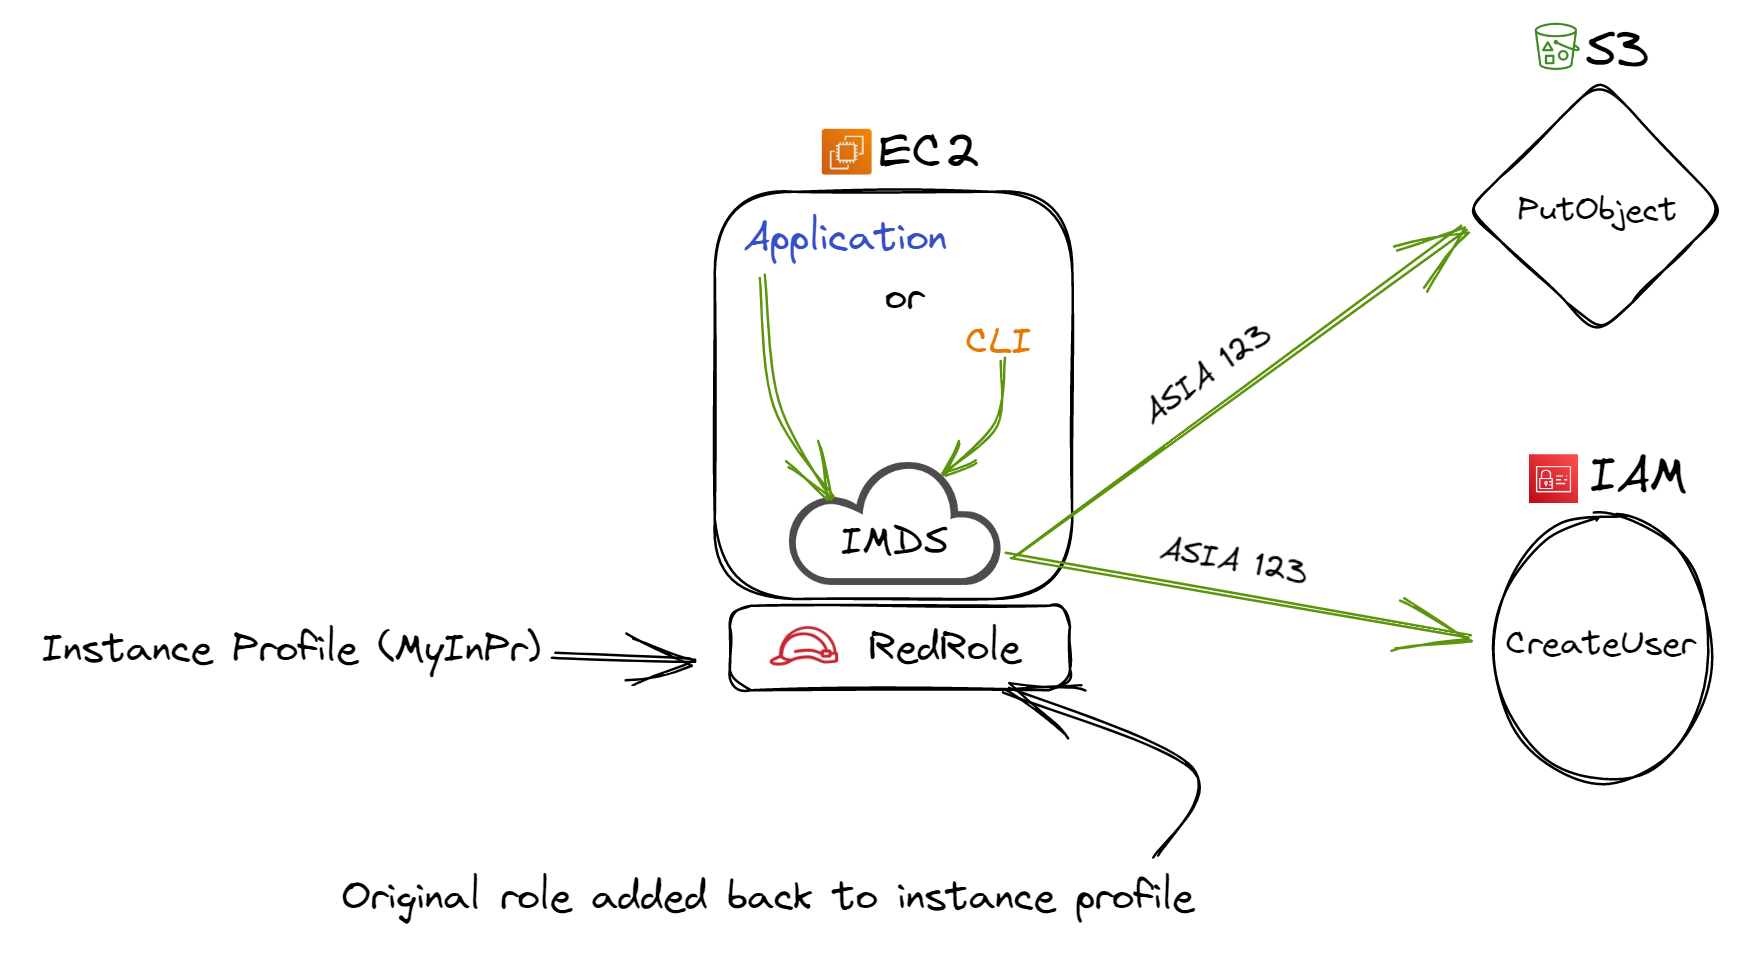 Figure 3: Original role added back to the AWS instance profile